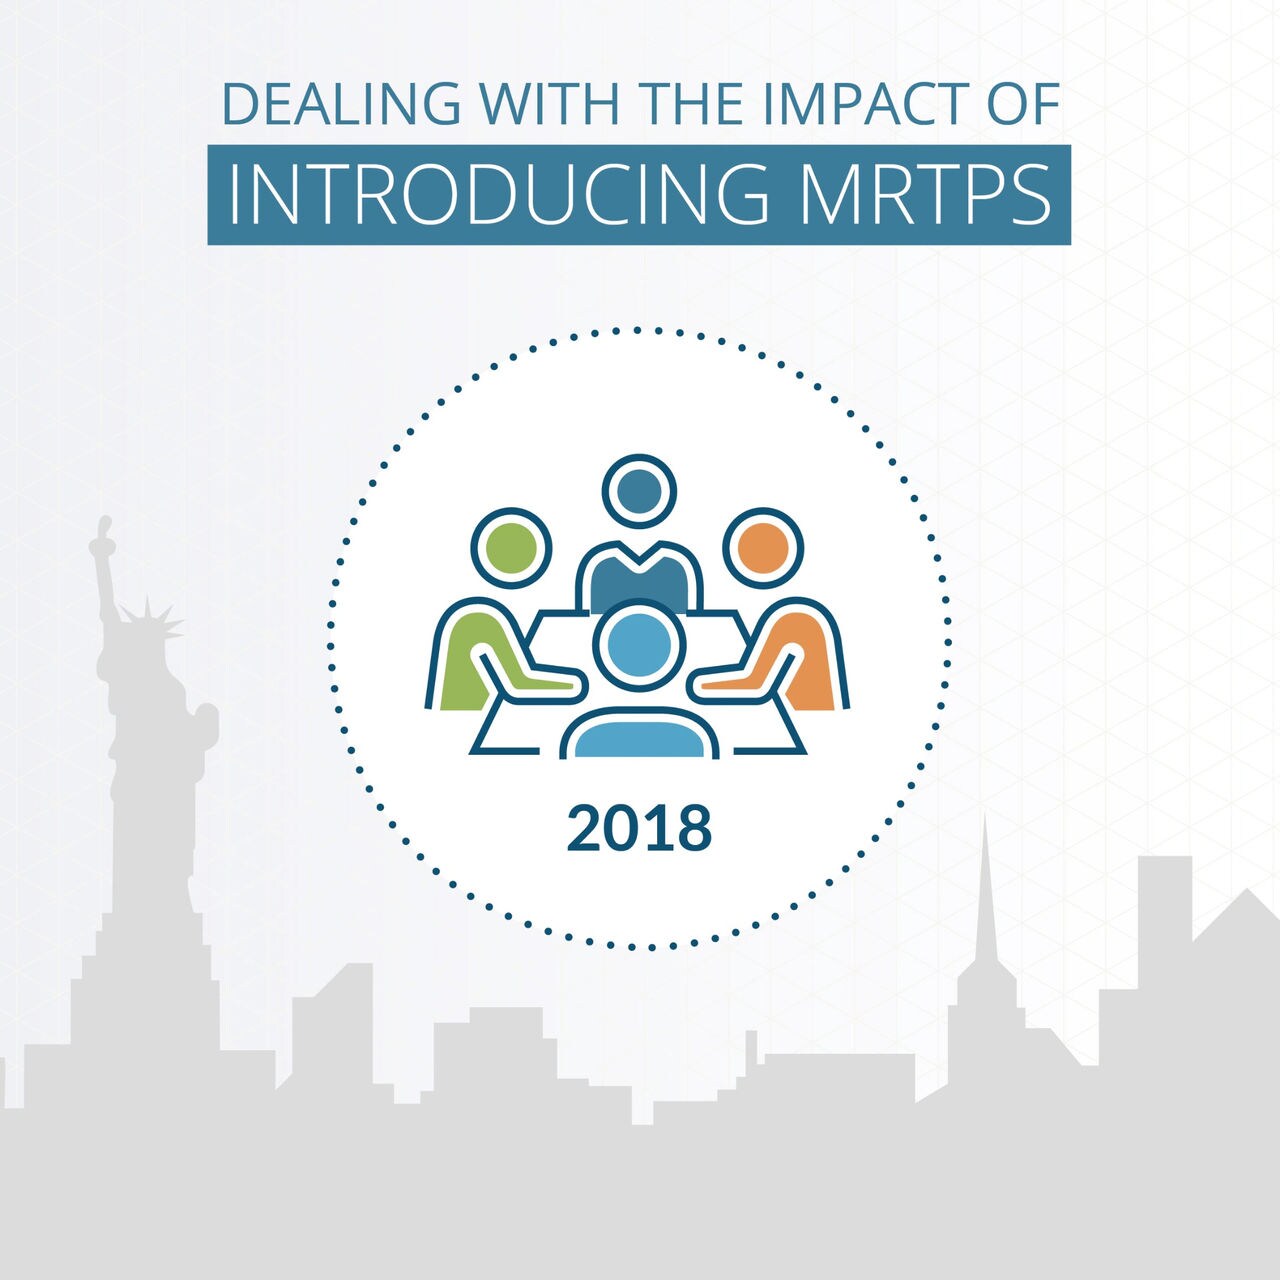 Infographic of handling the impact of MRPS 2018's implementation